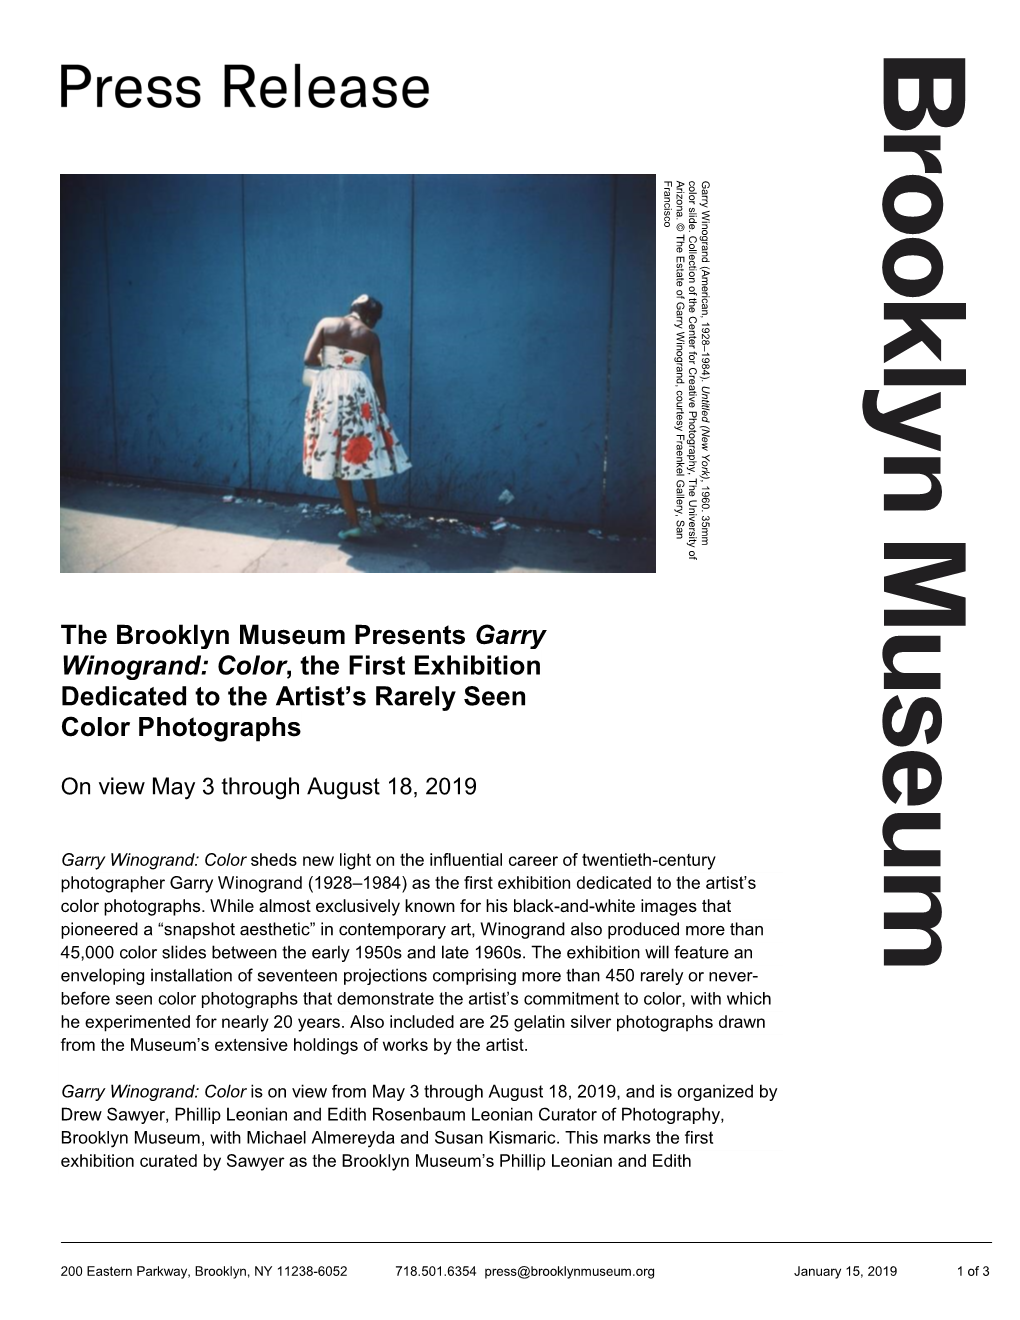 The Brooklyn Museum Presents Garry Winogrand: Color, the First Exhibition Dedicated to the Artist’S Rarely Seen Color Photographs